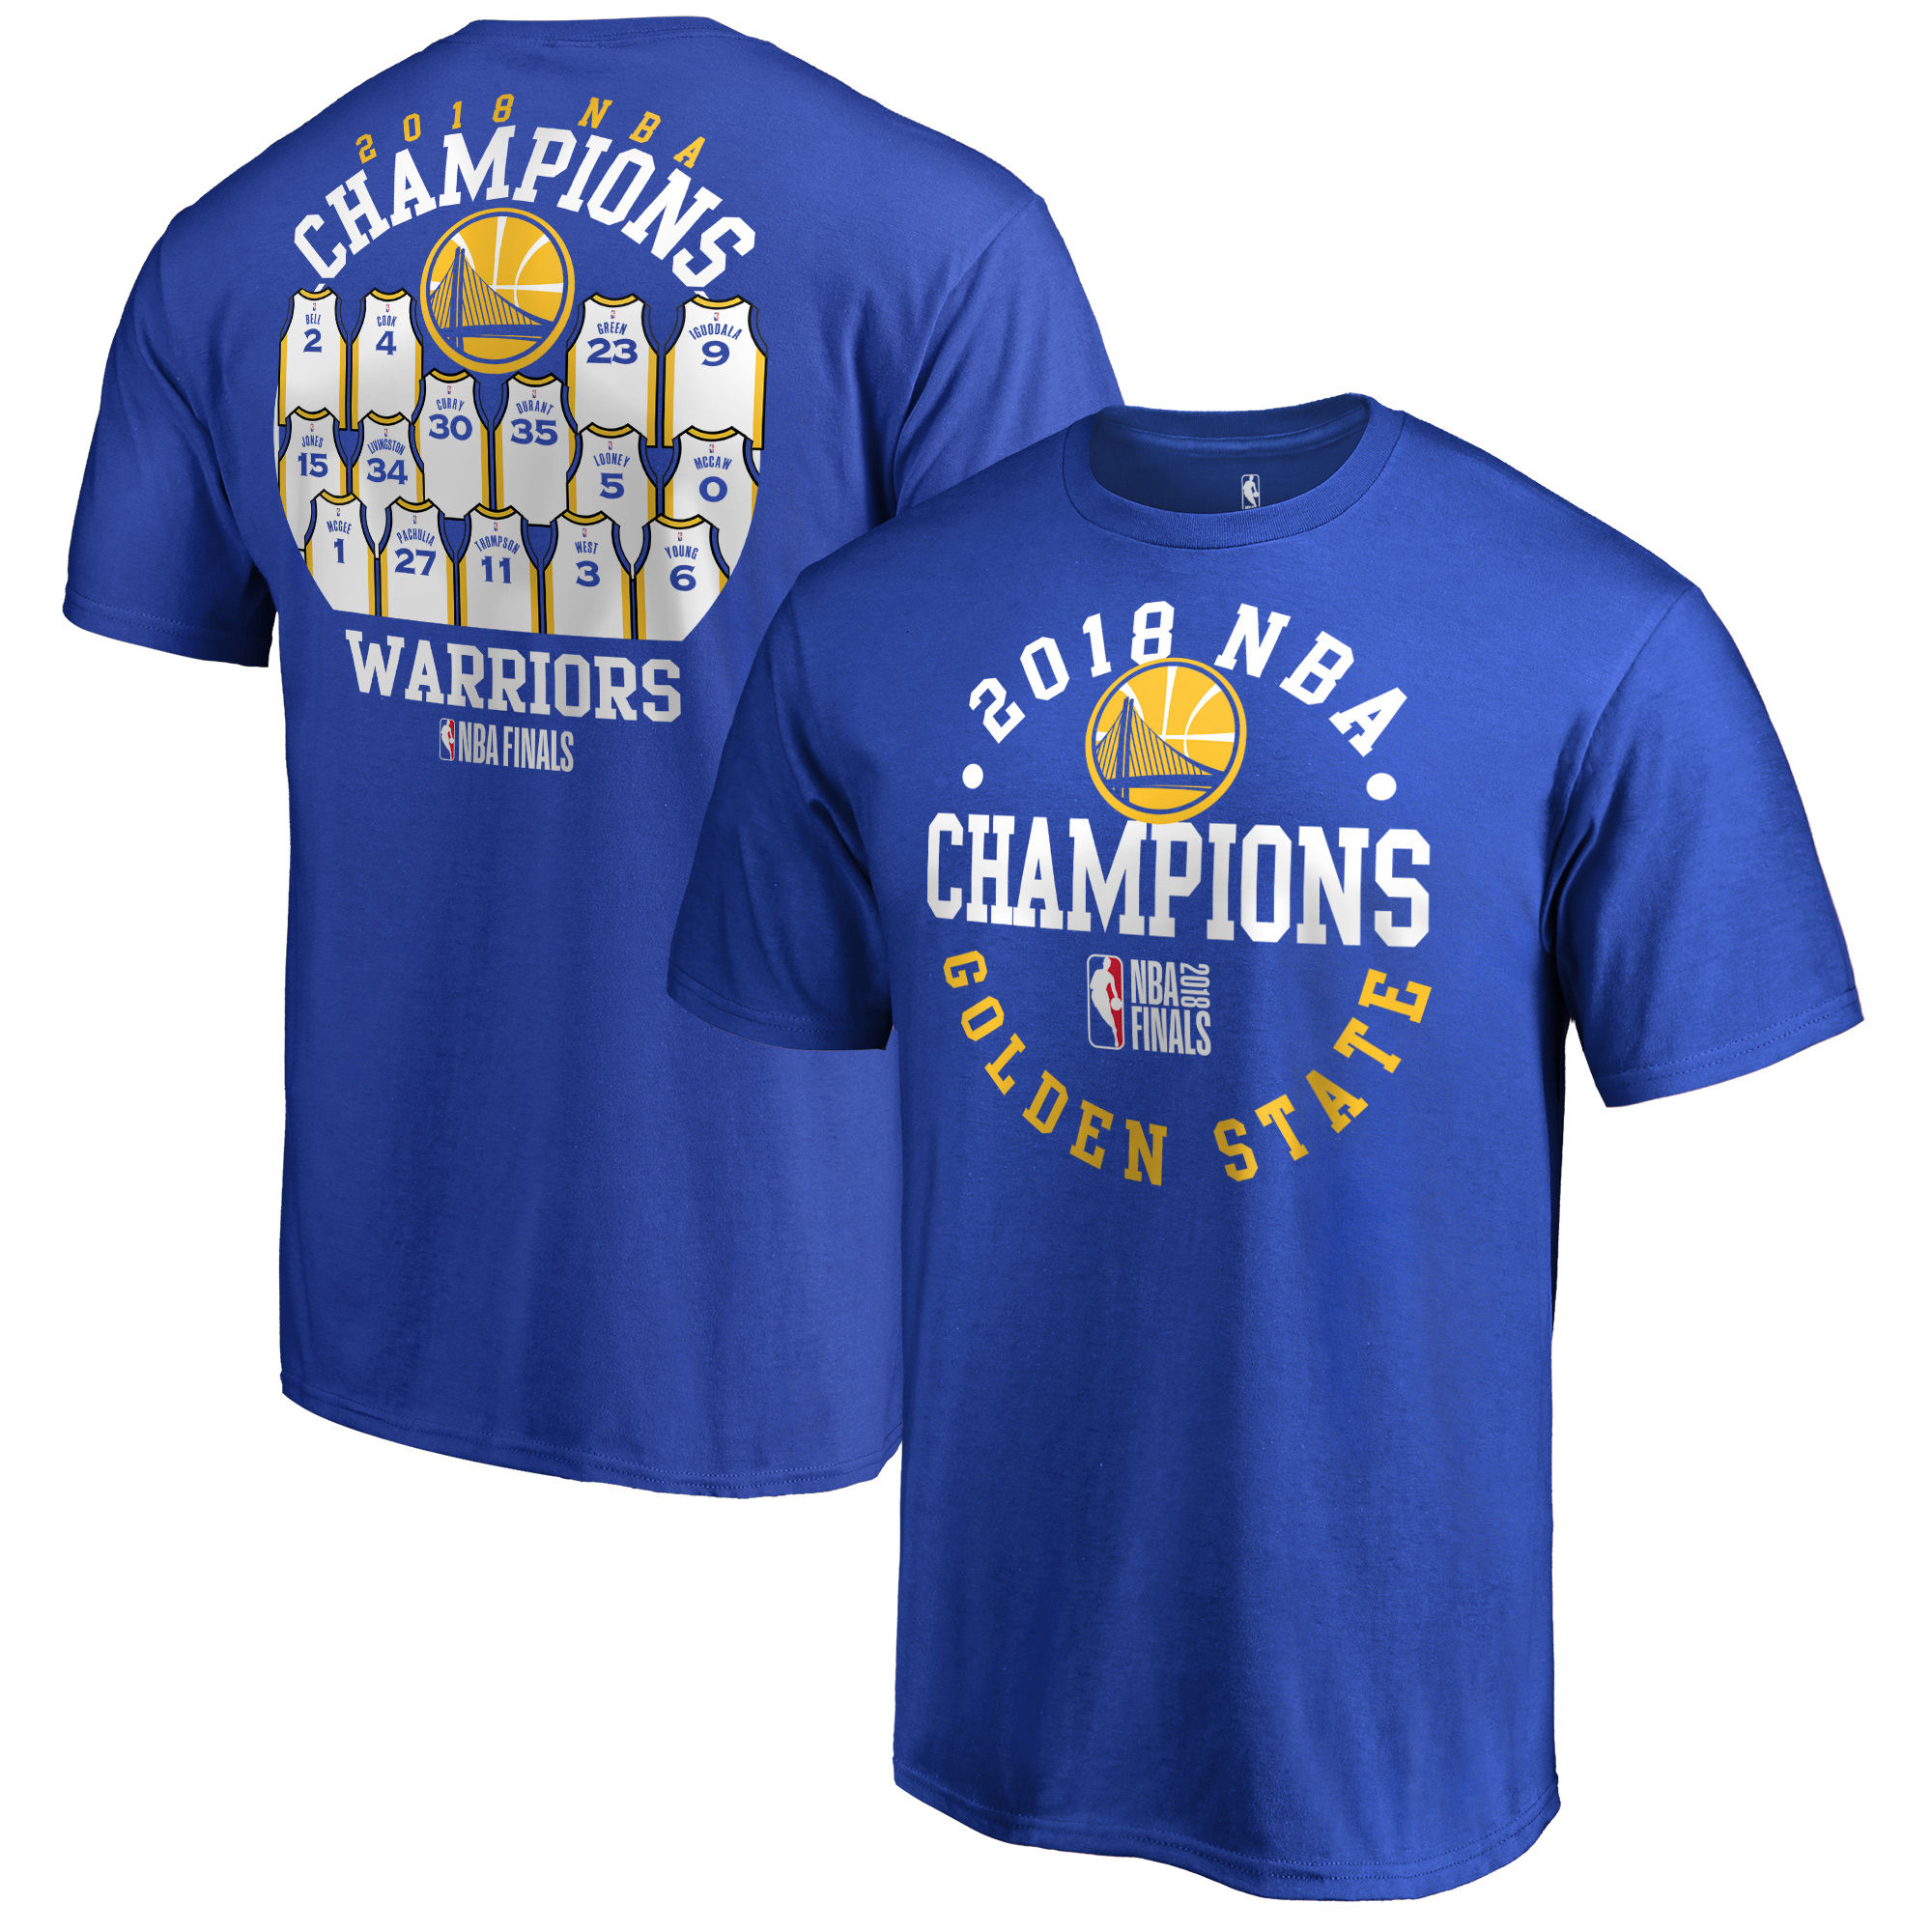 Golden State Warriors Fanatics Branded 2018 NBA Finals Champions Elevate the Game Jersey Roster T-Shirt Royal